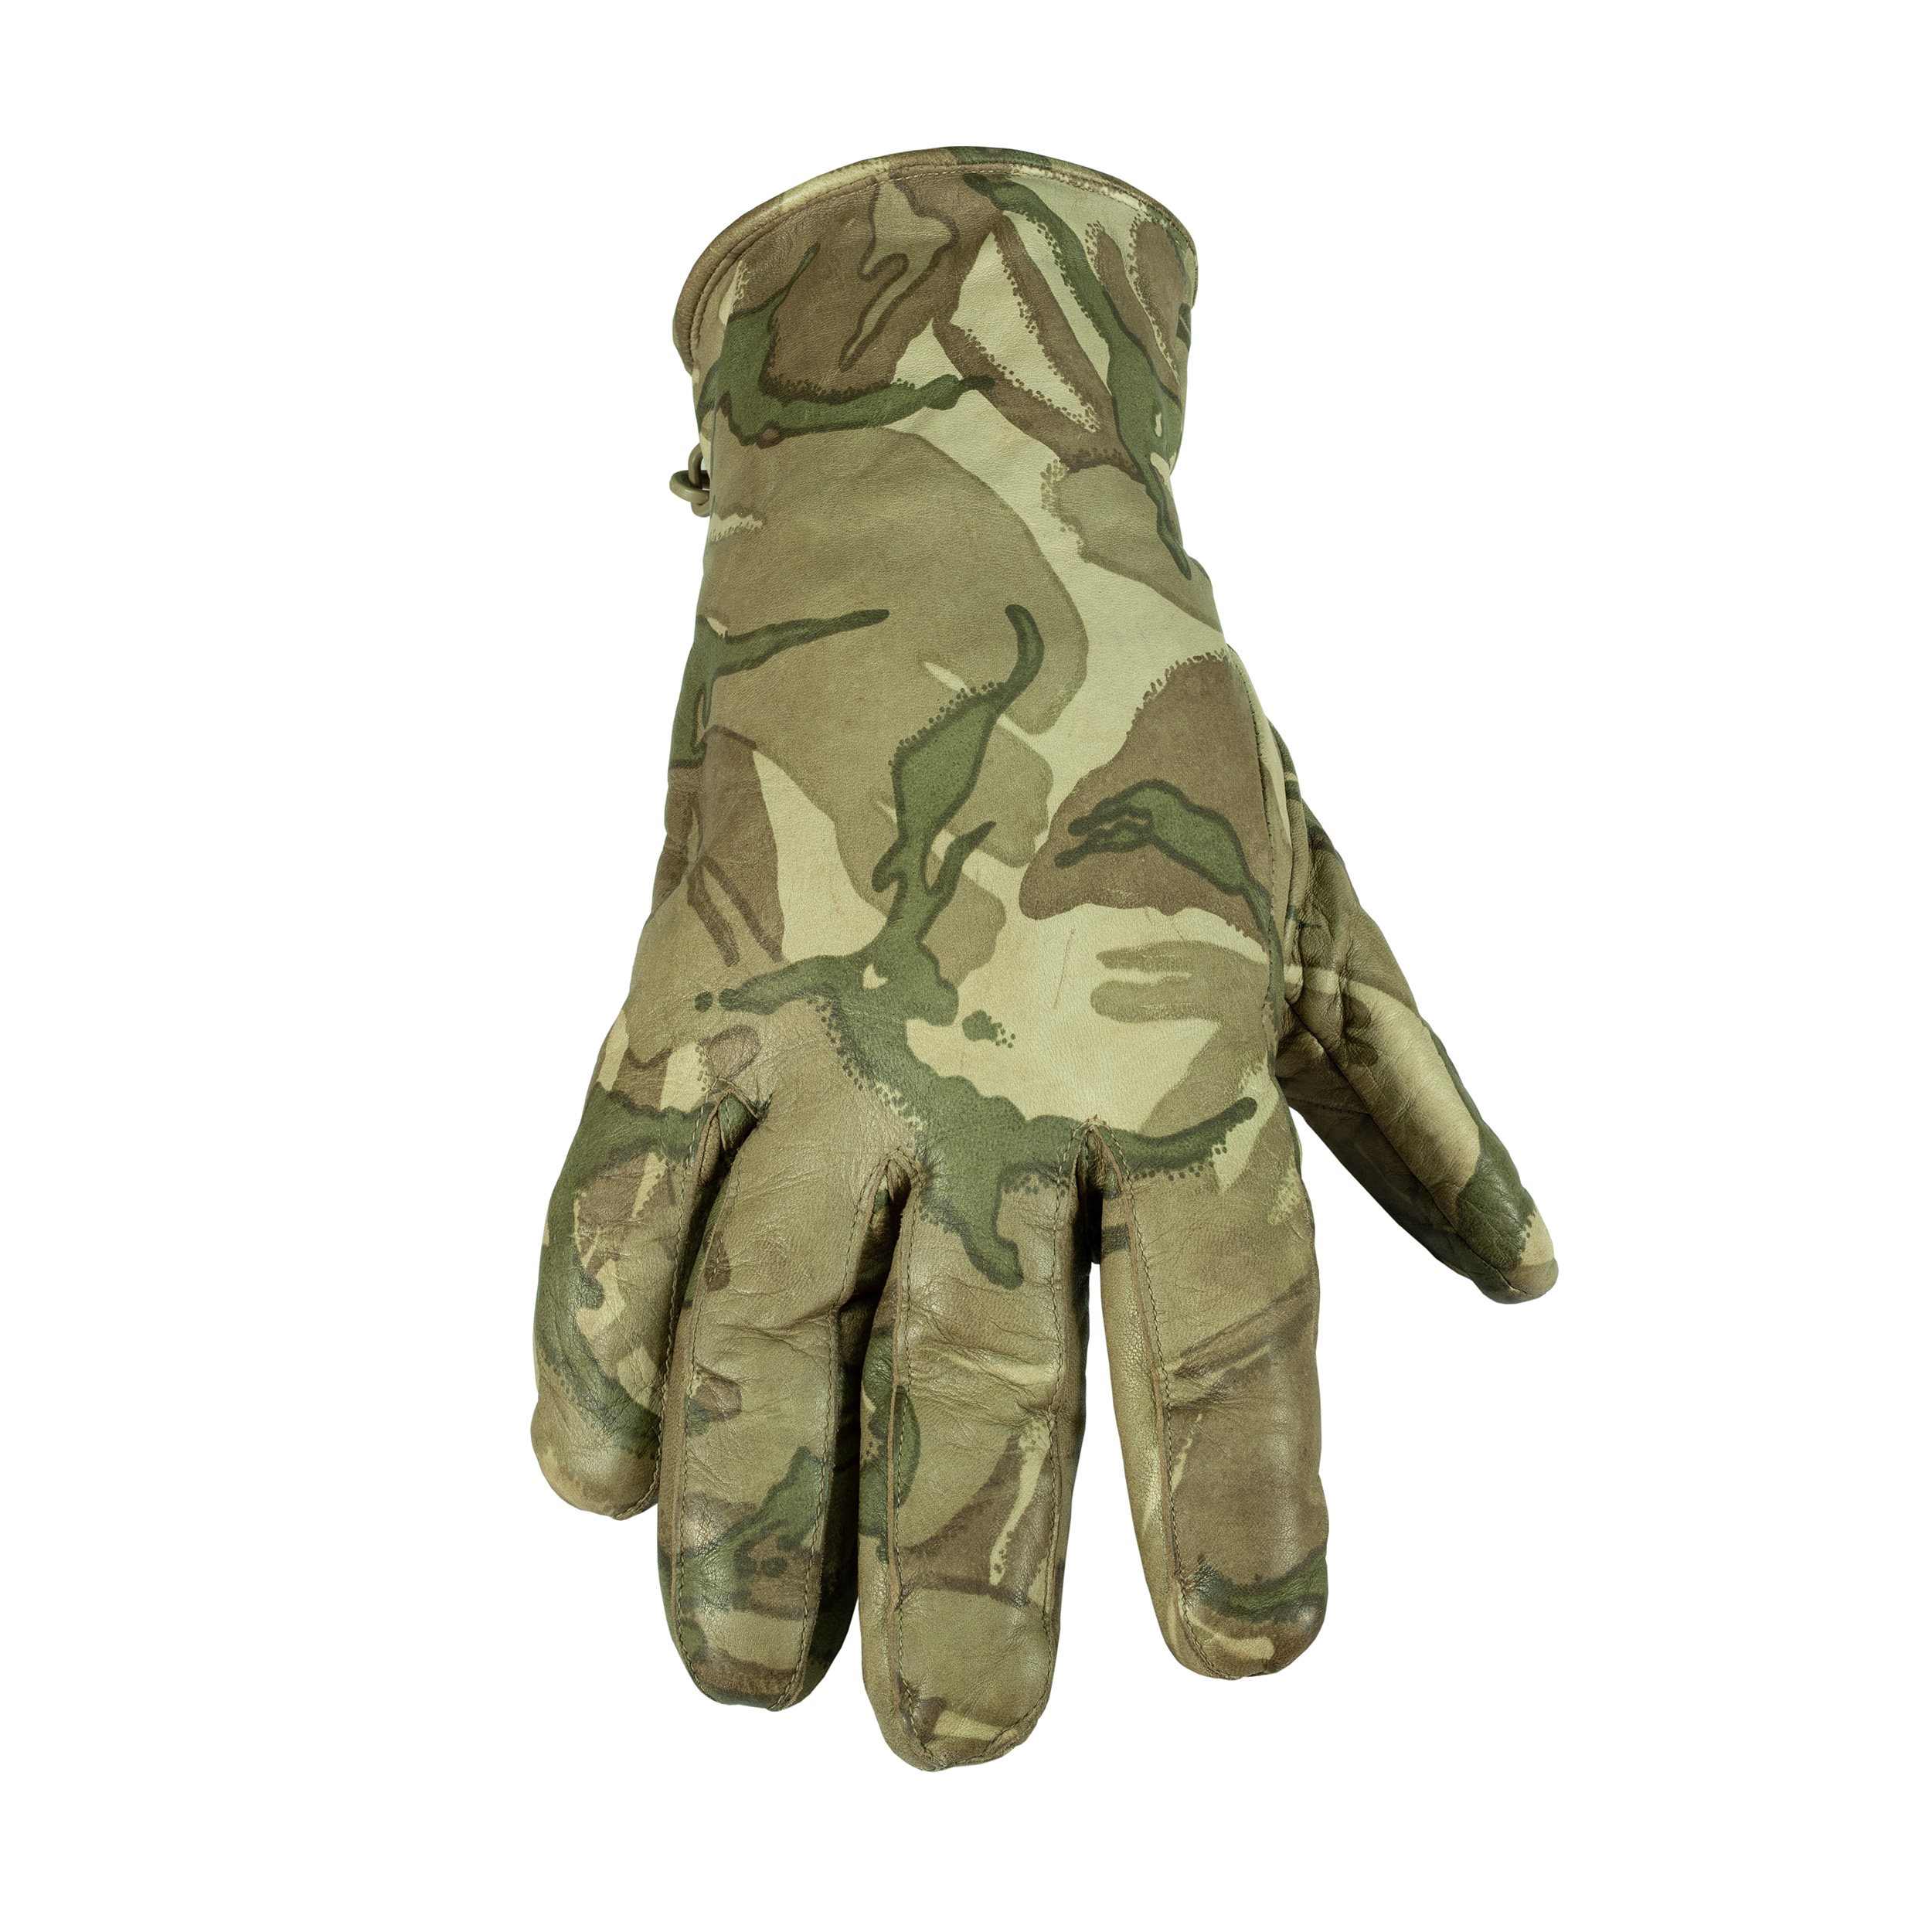 Used MK II Combat Insulated MTP Gloves British Army 6155759 L-11